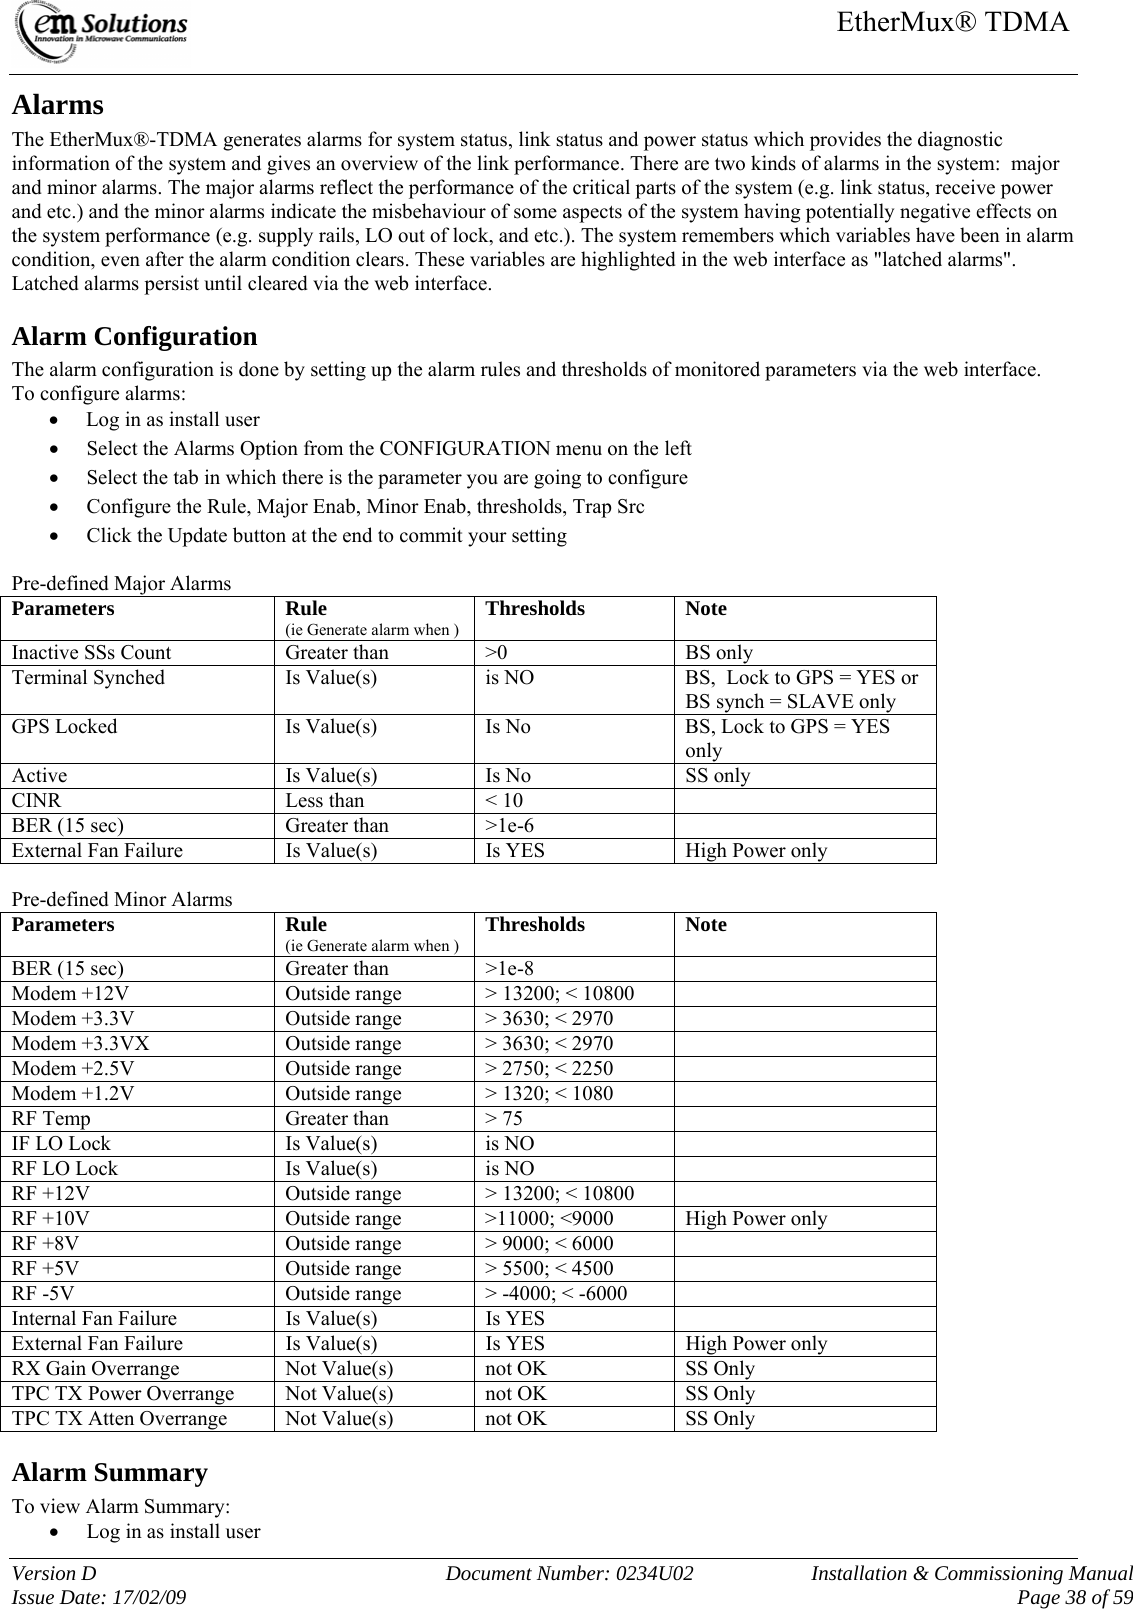     EtherMux® TDMA   Version D  Document Number: 0234U02   Installation &amp; Commissioning Manual Issue Date: 17/02/09     Page 38 of 59 Alarms The EtherMux®-TDMA generates alarms for system status, link status and power status which provides the diagnostic information of the system and gives an overview of the link performance. There are two kinds of alarms in the system:  major and minor alarms. The major alarms reflect the performance of the critical parts of the system (e.g. link status, receive power and etc.) and the minor alarms indicate the misbehaviour of some aspects of the system having potentially negative effects on the system performance (e.g. supply rails, LO out of lock, and etc.). The system remembers which variables have been in alarm condition, even after the alarm condition clears. These variables are highlighted in the web interface as &quot;latched alarms&quot;. Latched alarms persist until cleared via the web interface. Alarm Configuration The alarm configuration is done by setting up the alarm rules and thresholds of monitored parameters via the web interface. To configure alarms: • Log in as install user • Select the Alarms Option from the CONFIGURATION menu on the left • Select the tab in which there is the parameter you are going to configure • Configure the Rule, Major Enab, Minor Enab, thresholds, Trap Src  • Click the Update button at the end to commit your setting Pre-defined Major Alarms Parameters Rule  (ie Generate alarm when ) Thresholds Note Inactive SSs Count  Greater than  &gt;0  BS only Terminal Synched  Is Value(s)  is NO  BS,  Lock to GPS = YES or BS synch = SLAVE only GPS Locked  Is Value(s)  Is No  BS, Lock to GPS = YES only Active   Is Value(s)  Is No  SS only CINR  Less than  &lt; 10   BER (15 sec)  Greater than  &gt;1e-6   External Fan Failure  Is Value(s)  Is YES  High Power only  Pre-defined Minor Alarms Parameters Rule  (ie Generate alarm when ) Thresholds Note BER (15 sec)  Greater than  &gt;1e-8   Modem +12V  Outside range  &gt; 13200; &lt; 10800   Modem +3.3V  Outside range  &gt; 3630; &lt; 2970   Modem +3.3VX  Outside range  &gt; 3630; &lt; 2970   Modem +2.5V  Outside range  &gt; 2750; &lt; 2250   Modem +1.2V  Outside range  &gt; 1320; &lt; 1080   RF Temp  Greater than  &gt; 75   IF LO Lock  Is Value(s)  is NO   RF LO Lock  Is Value(s)  is NO   RF +12V  Outside range  &gt; 13200; &lt; 10800   RF +10V  Outside range  &gt;11000; &lt;9000  High Power only RF +8V  Outside range  &gt; 9000; &lt; 6000   RF +5V  Outside range  &gt; 5500; &lt; 4500   RF -5V  Outside range  &gt; -4000; &lt; -6000   Internal Fan Failure  Is Value(s)  Is YES   External Fan Failure  Is Value(s)  Is YES  High Power only RX Gain Overrange  Not Value(s)  not OK  SS Only TPC TX Power Overrange  Not Value(s)  not OK  SS Only TPC TX Atten Overrange  Not Value(s)  not OK  SS Only Alarm Summary To view Alarm Summary: • Log in as install user 